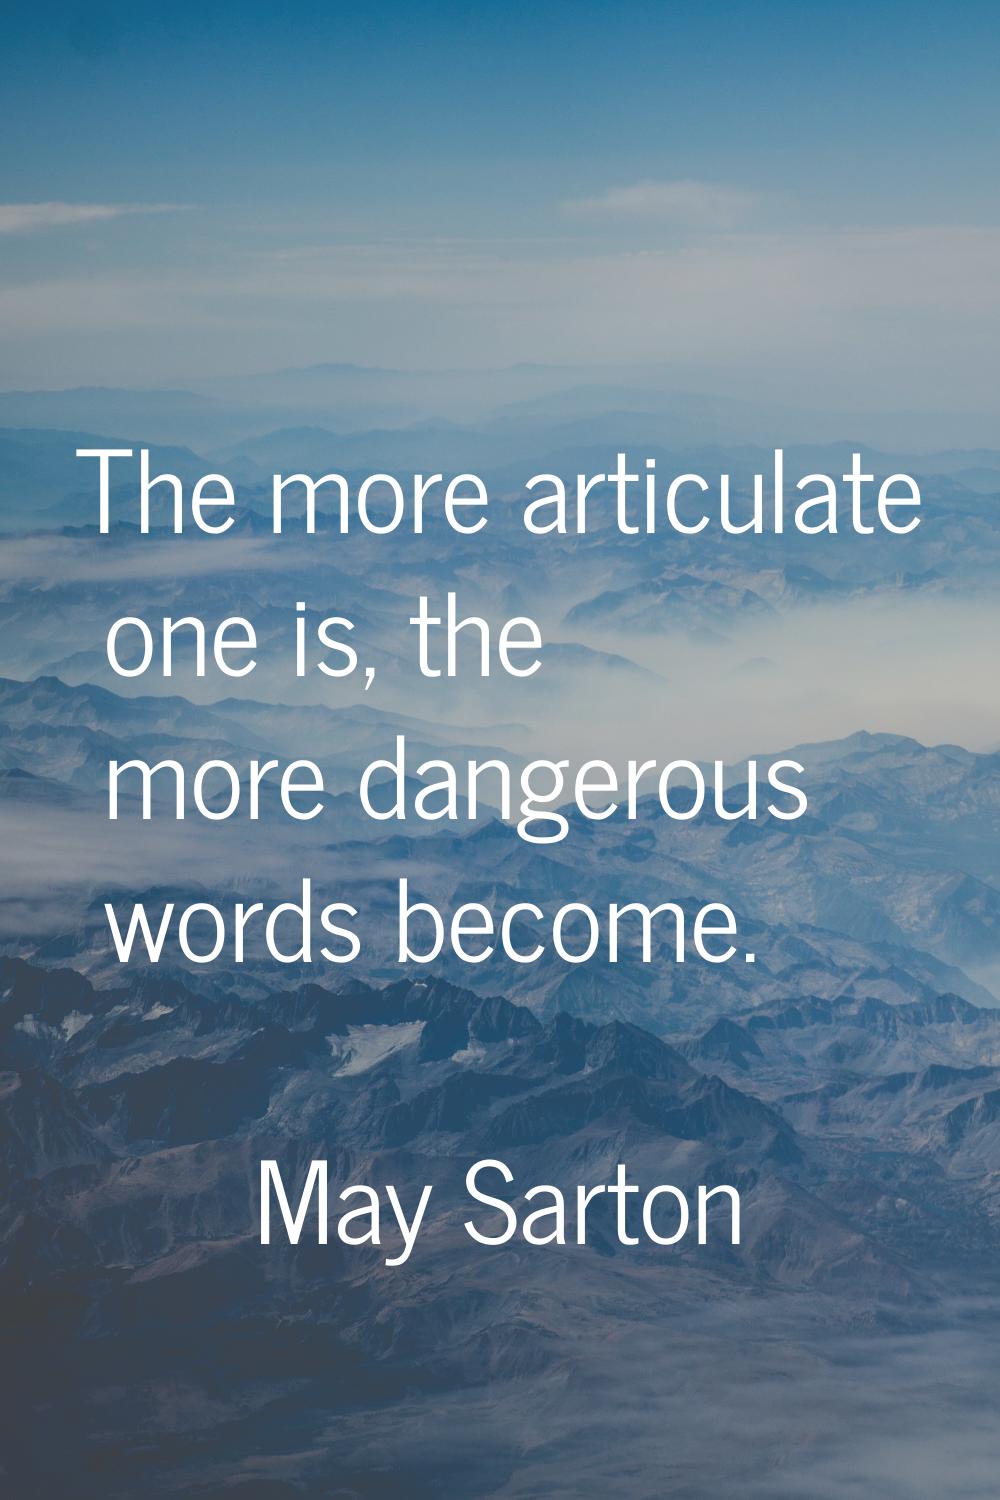 The more articulate one is, the more dangerous words become.